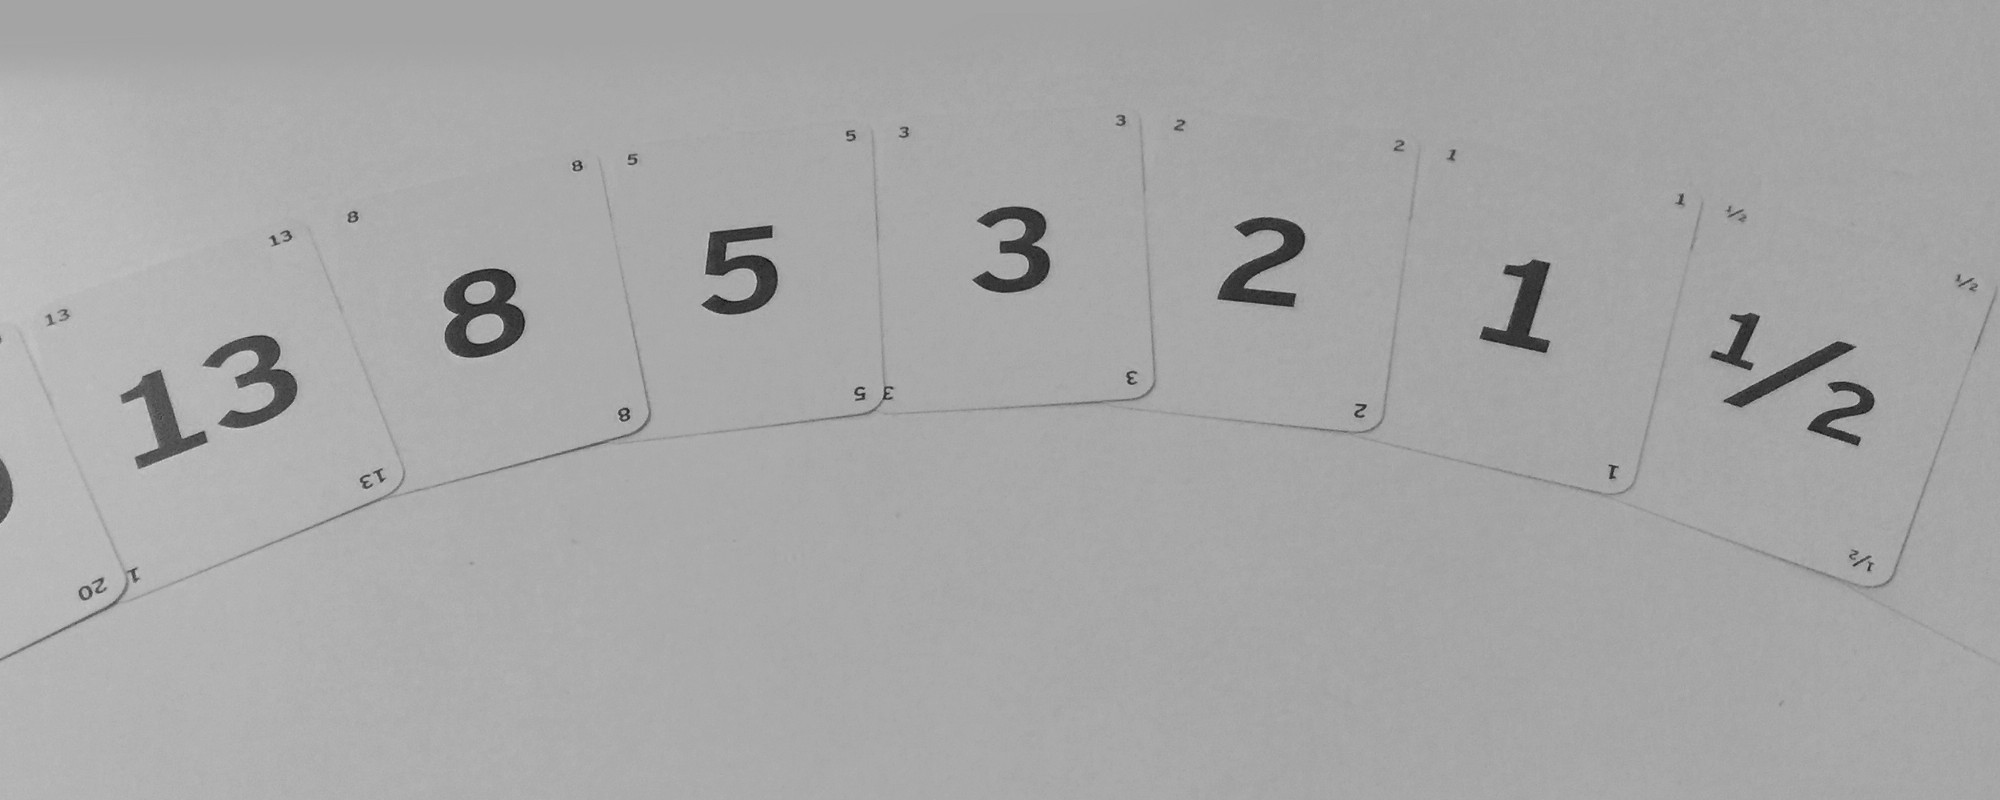 Powerful Agile estimation with planning poker